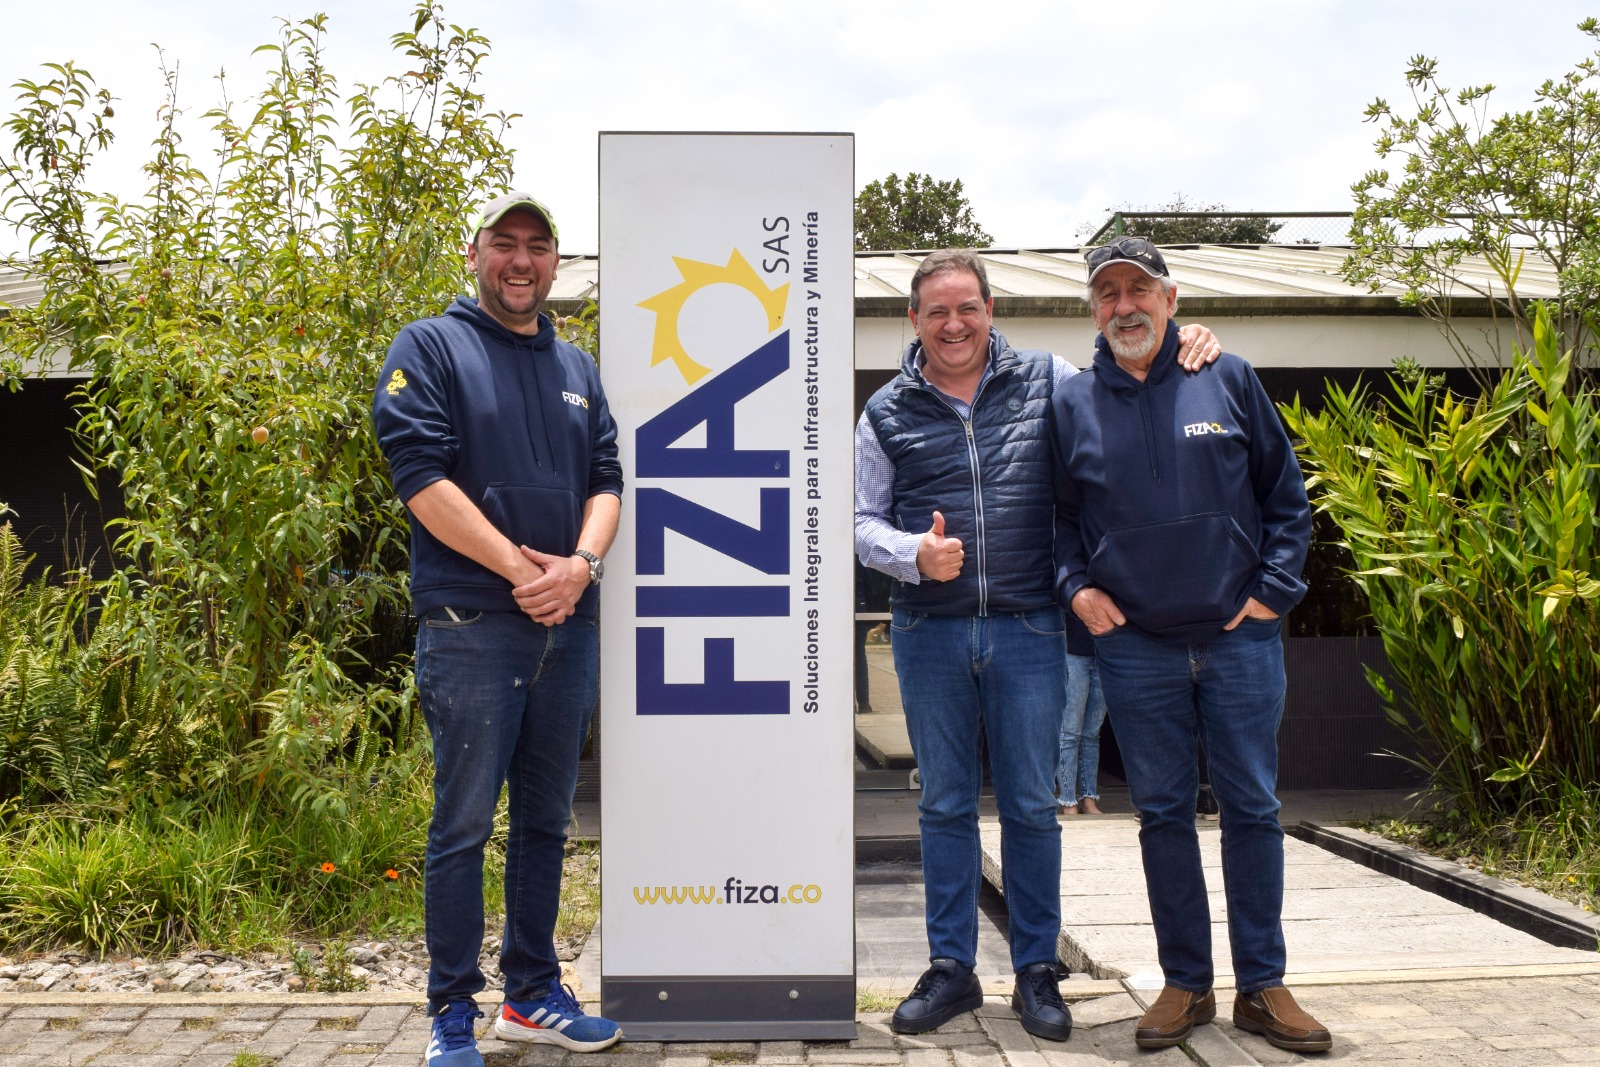 Lintec & Linnhoff announces FIZA as its new dealer for Colombia